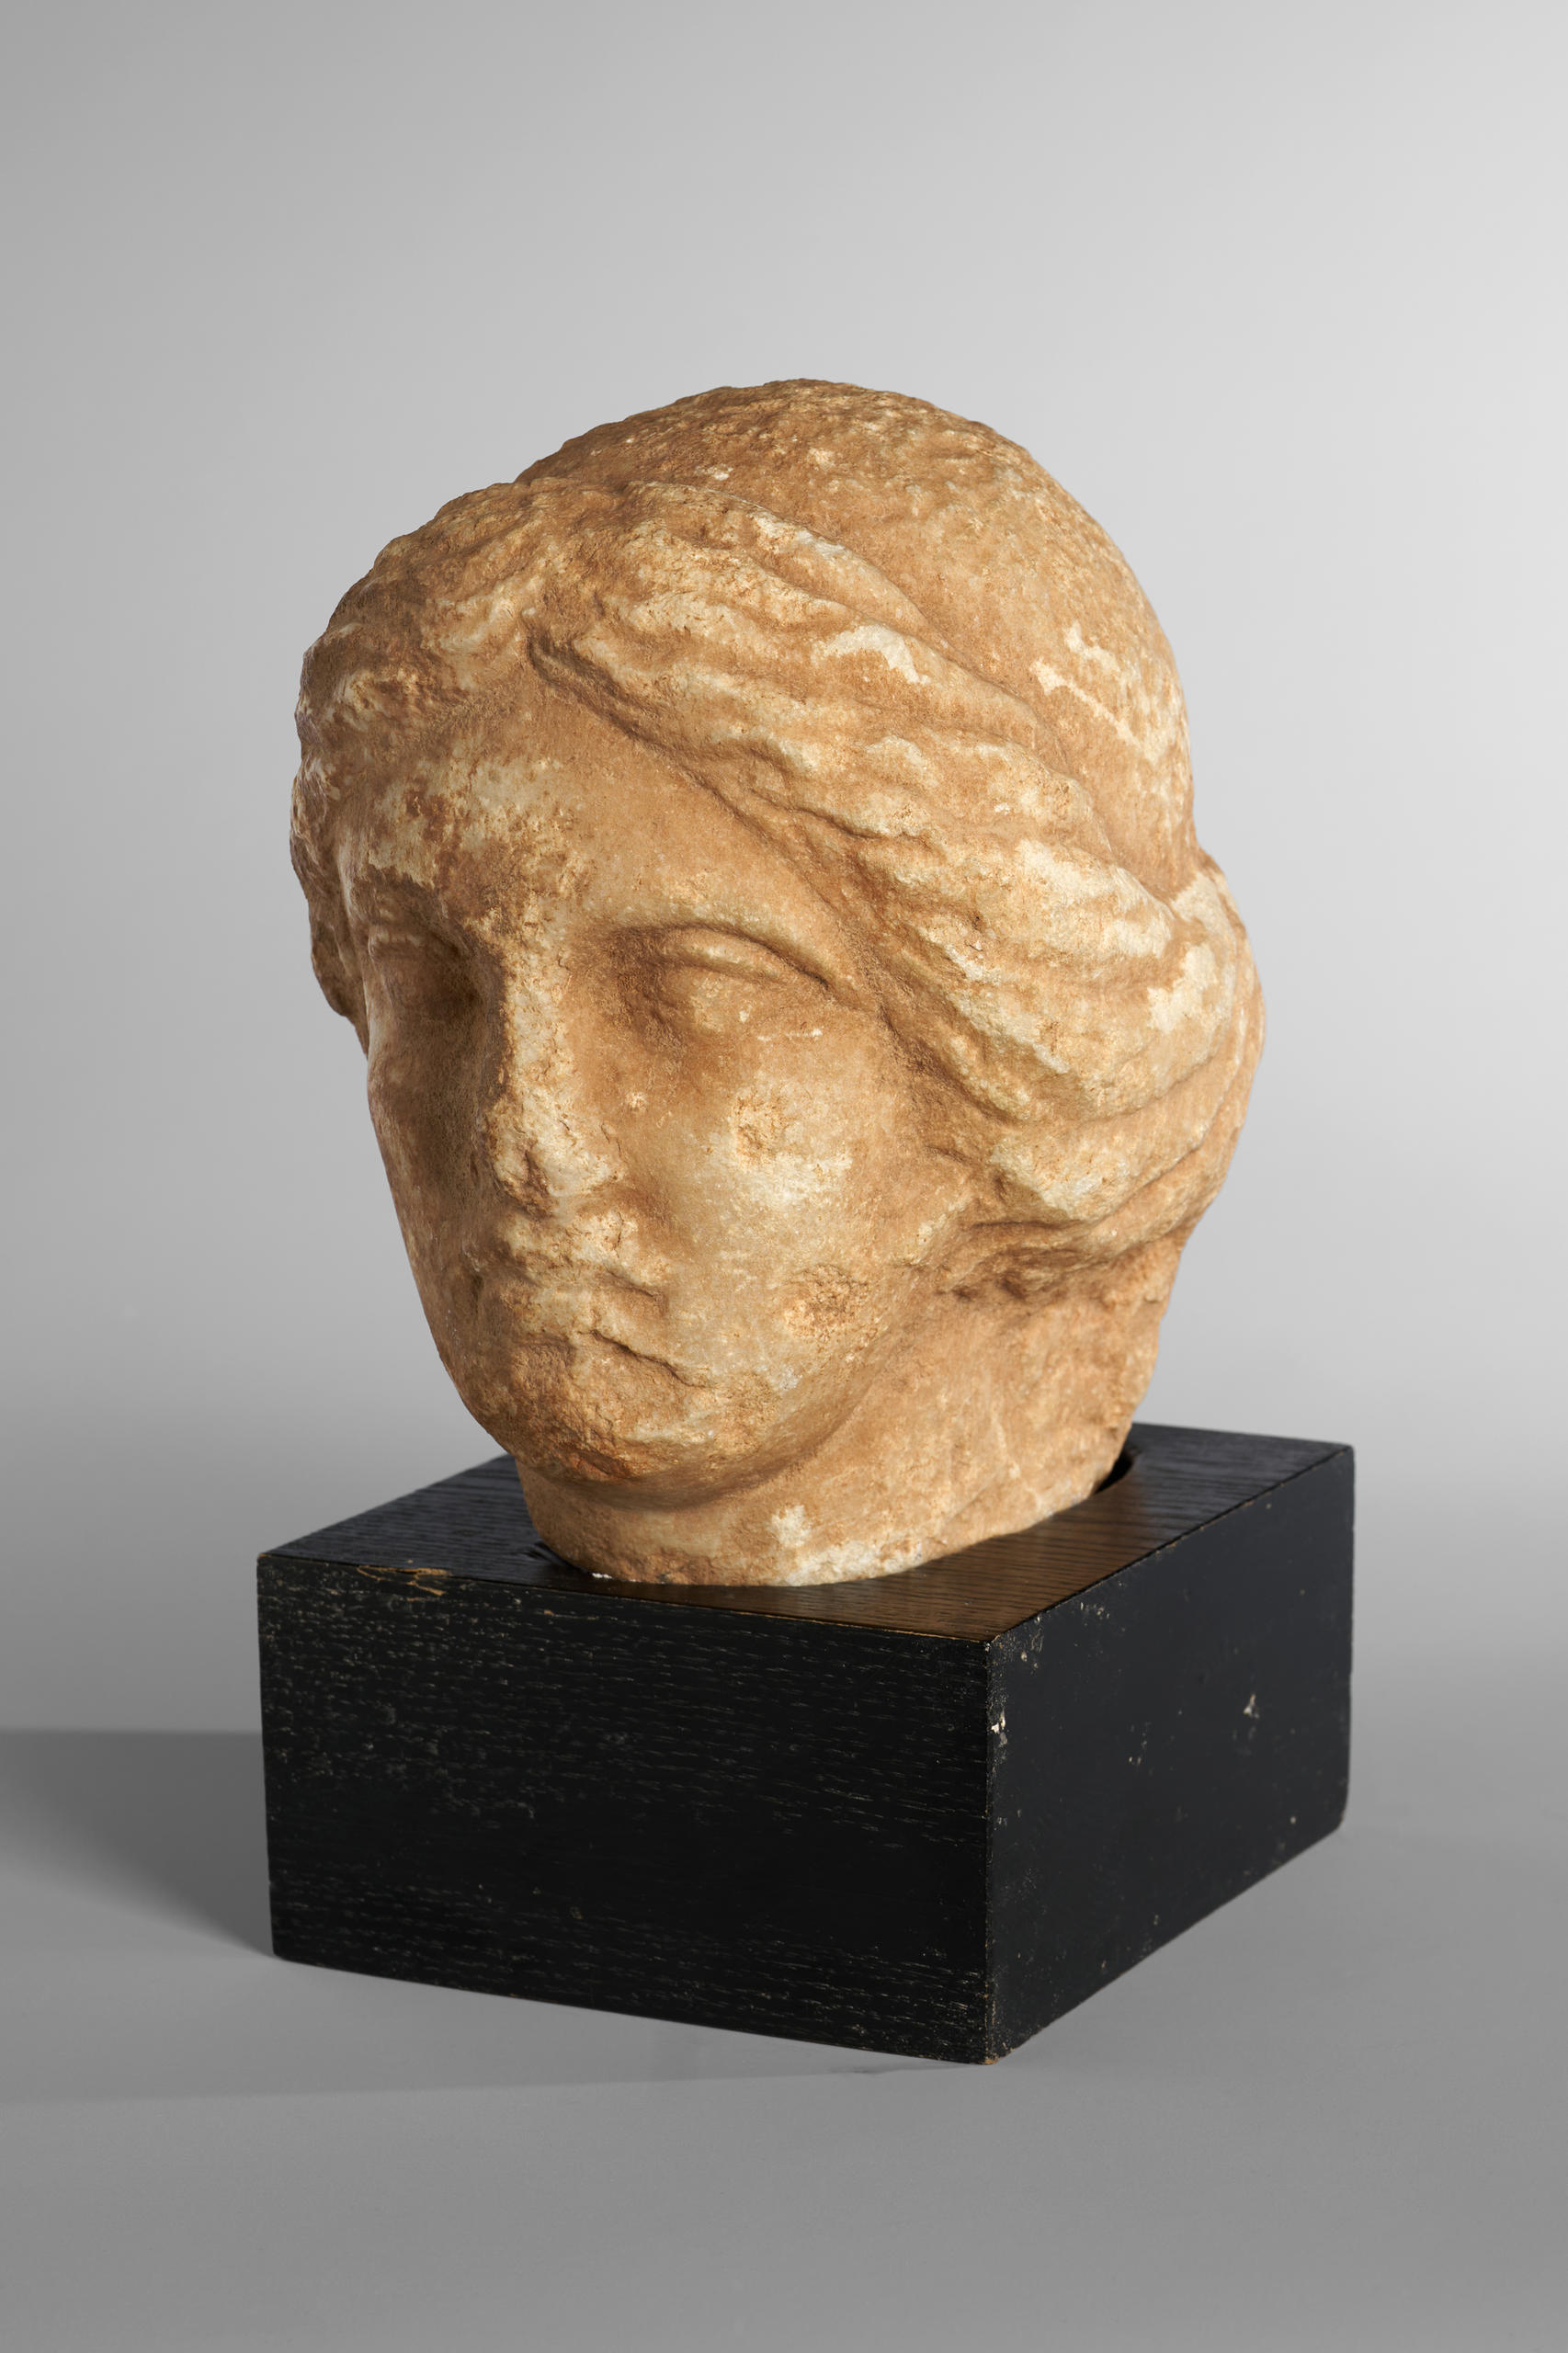 Marble sculpture of the head of a young woman